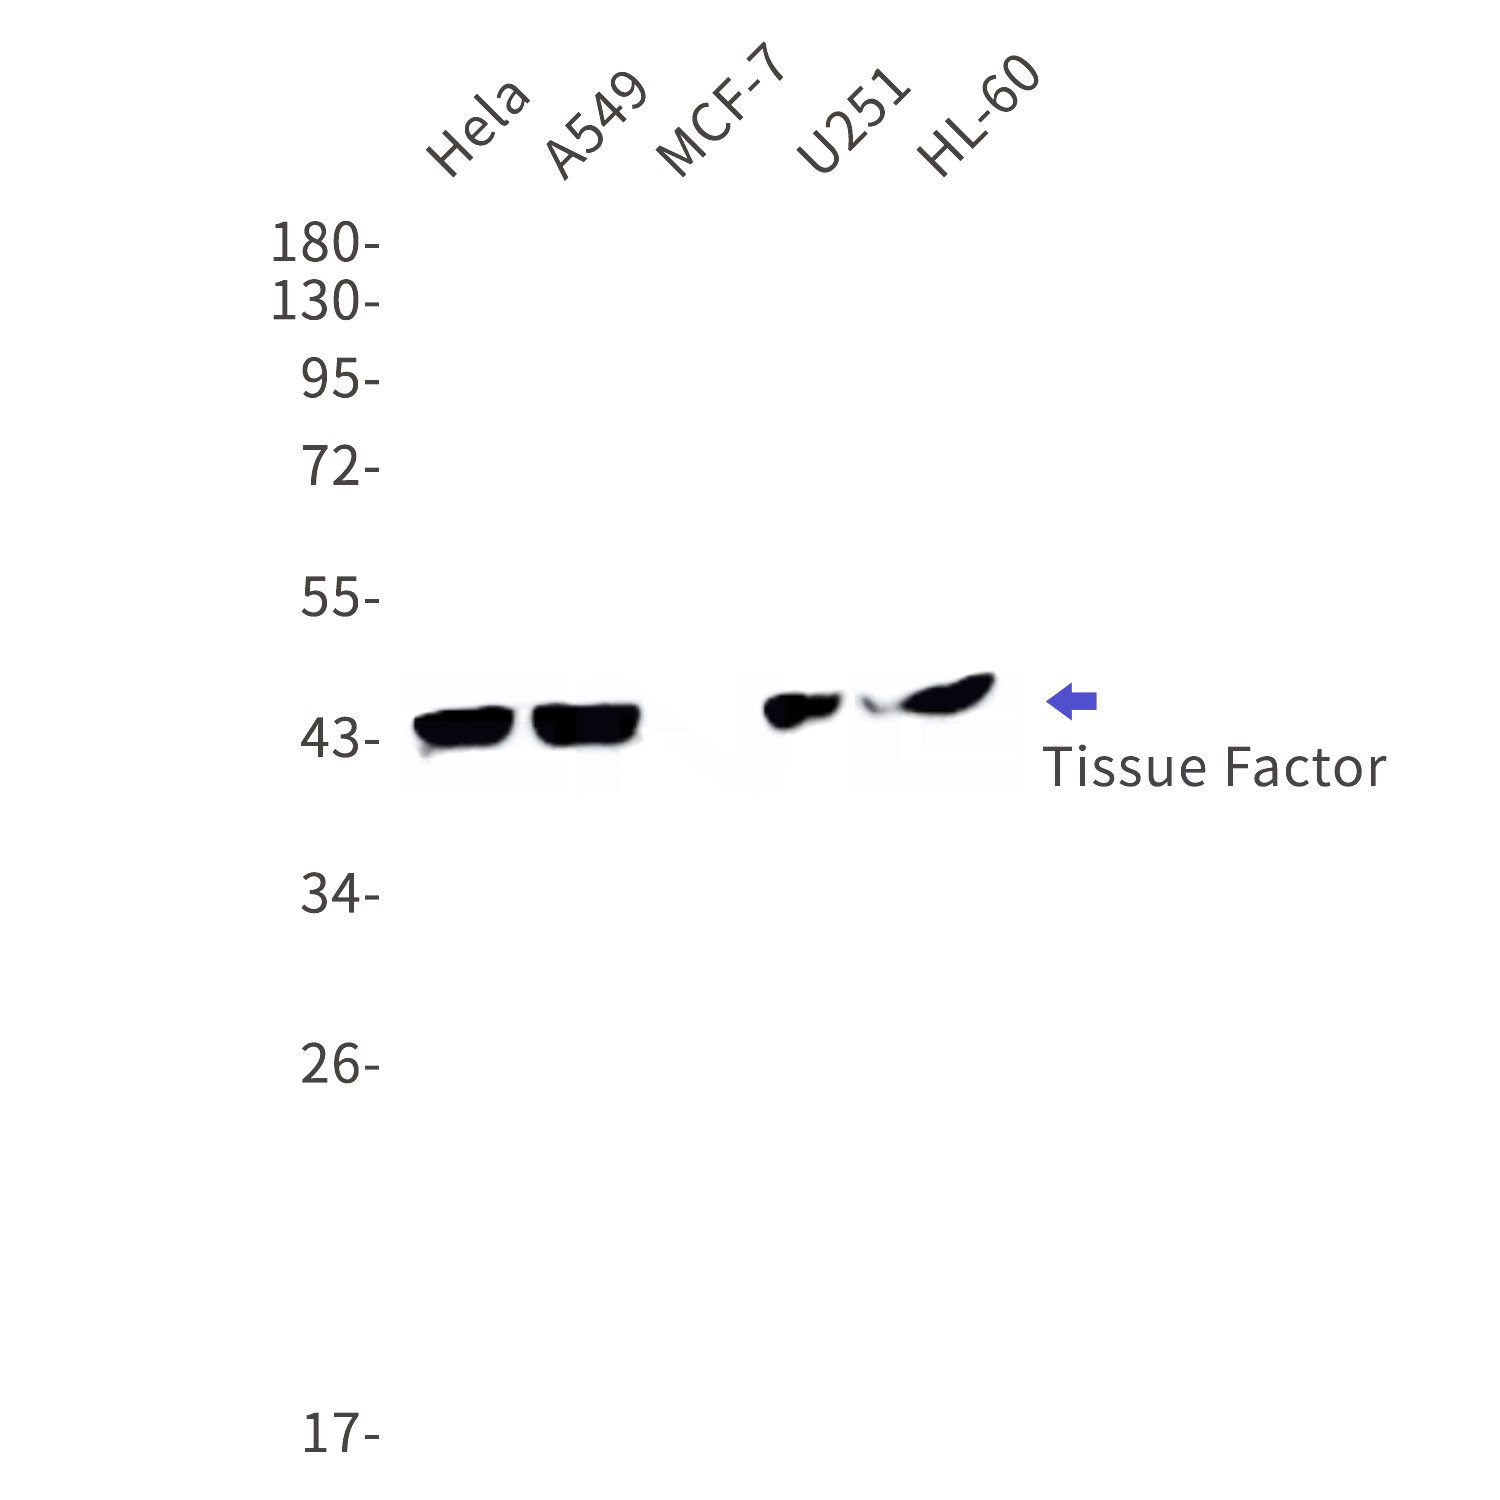 Western blot detection of Tissue Factor in Hela,A549,MCF-7,U251,HL-60 cell lysates using Tissue Factor Rabbit mAb(1:1000 diluted).Predicted band size:33kDa.Observed band size:45kDa.